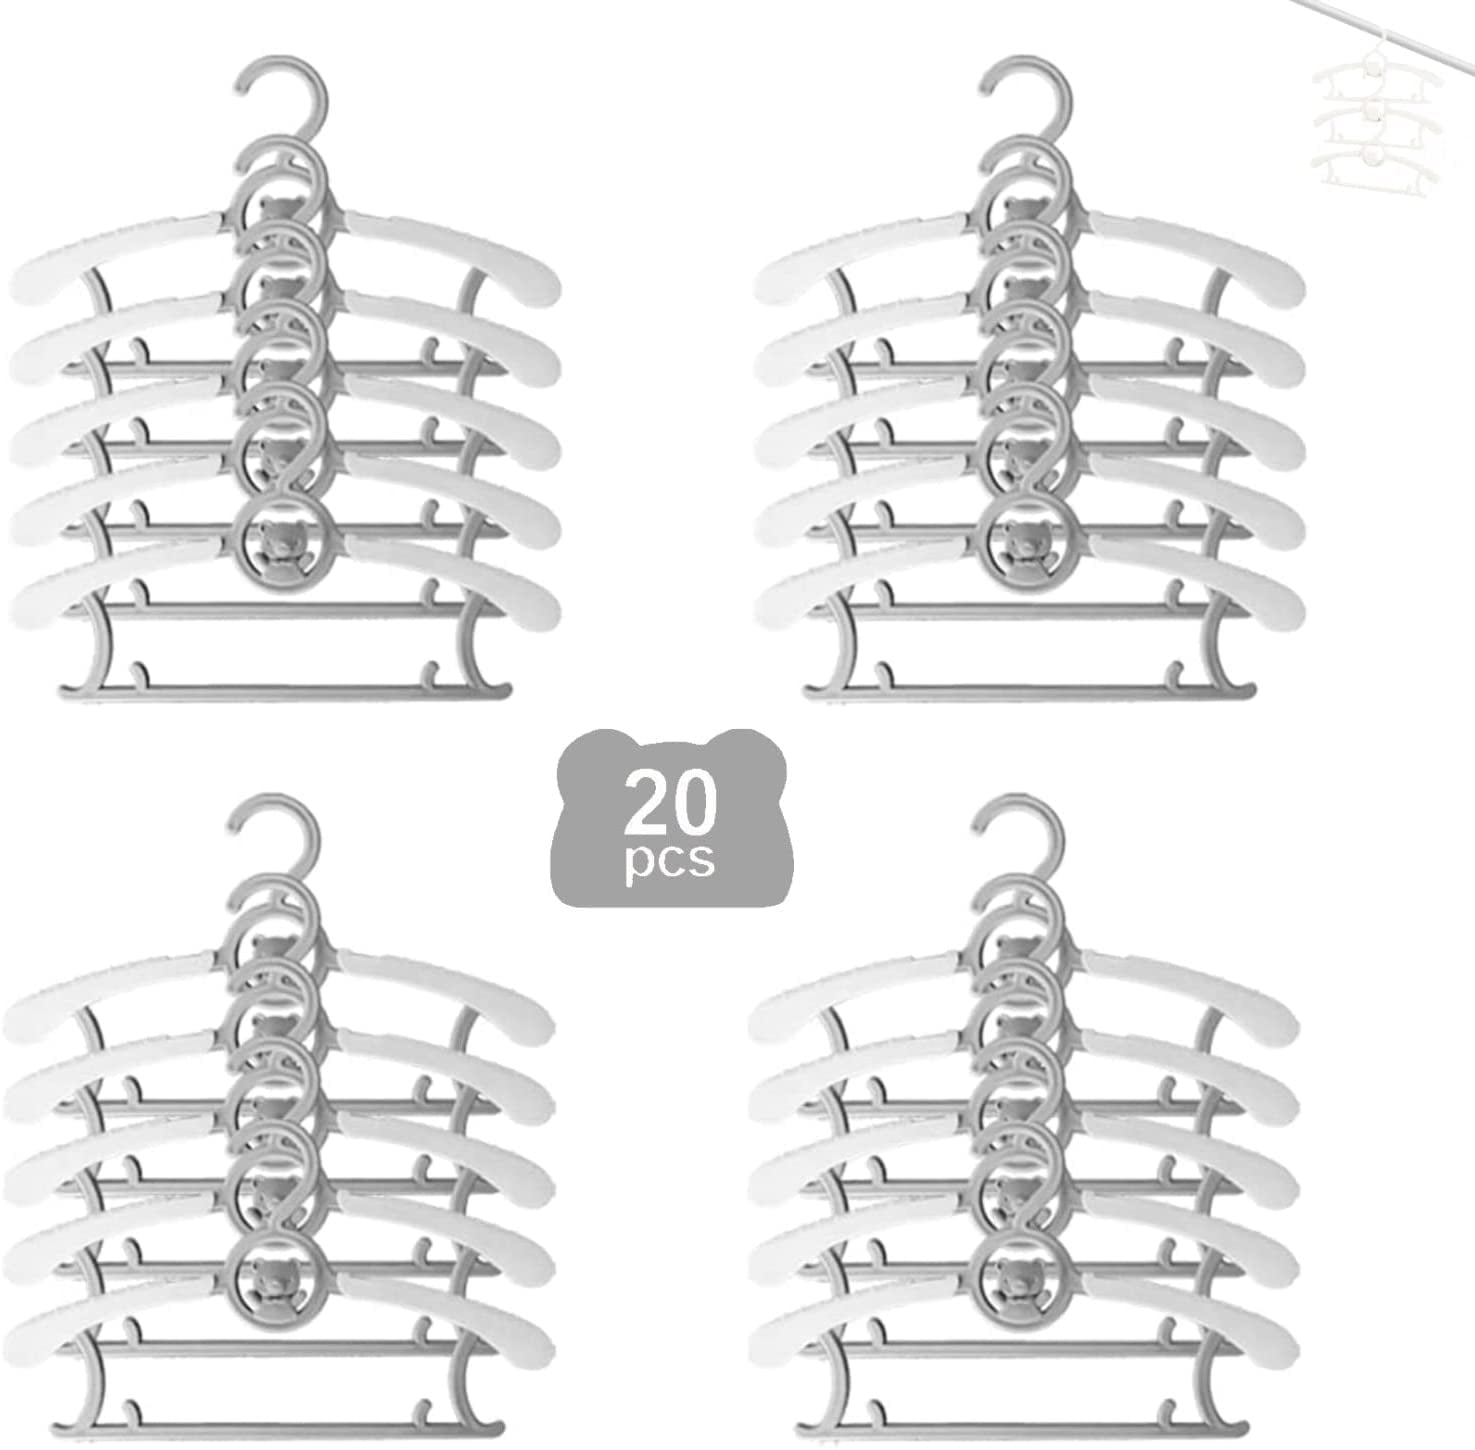 5-pack Adjustable Newborn Baby Hangers Plastic Non-Slip Extendable Laundry  Hangers for Toddler Kids Child Clothes Only د.ب.‏ 2.30 بات بات Mobile